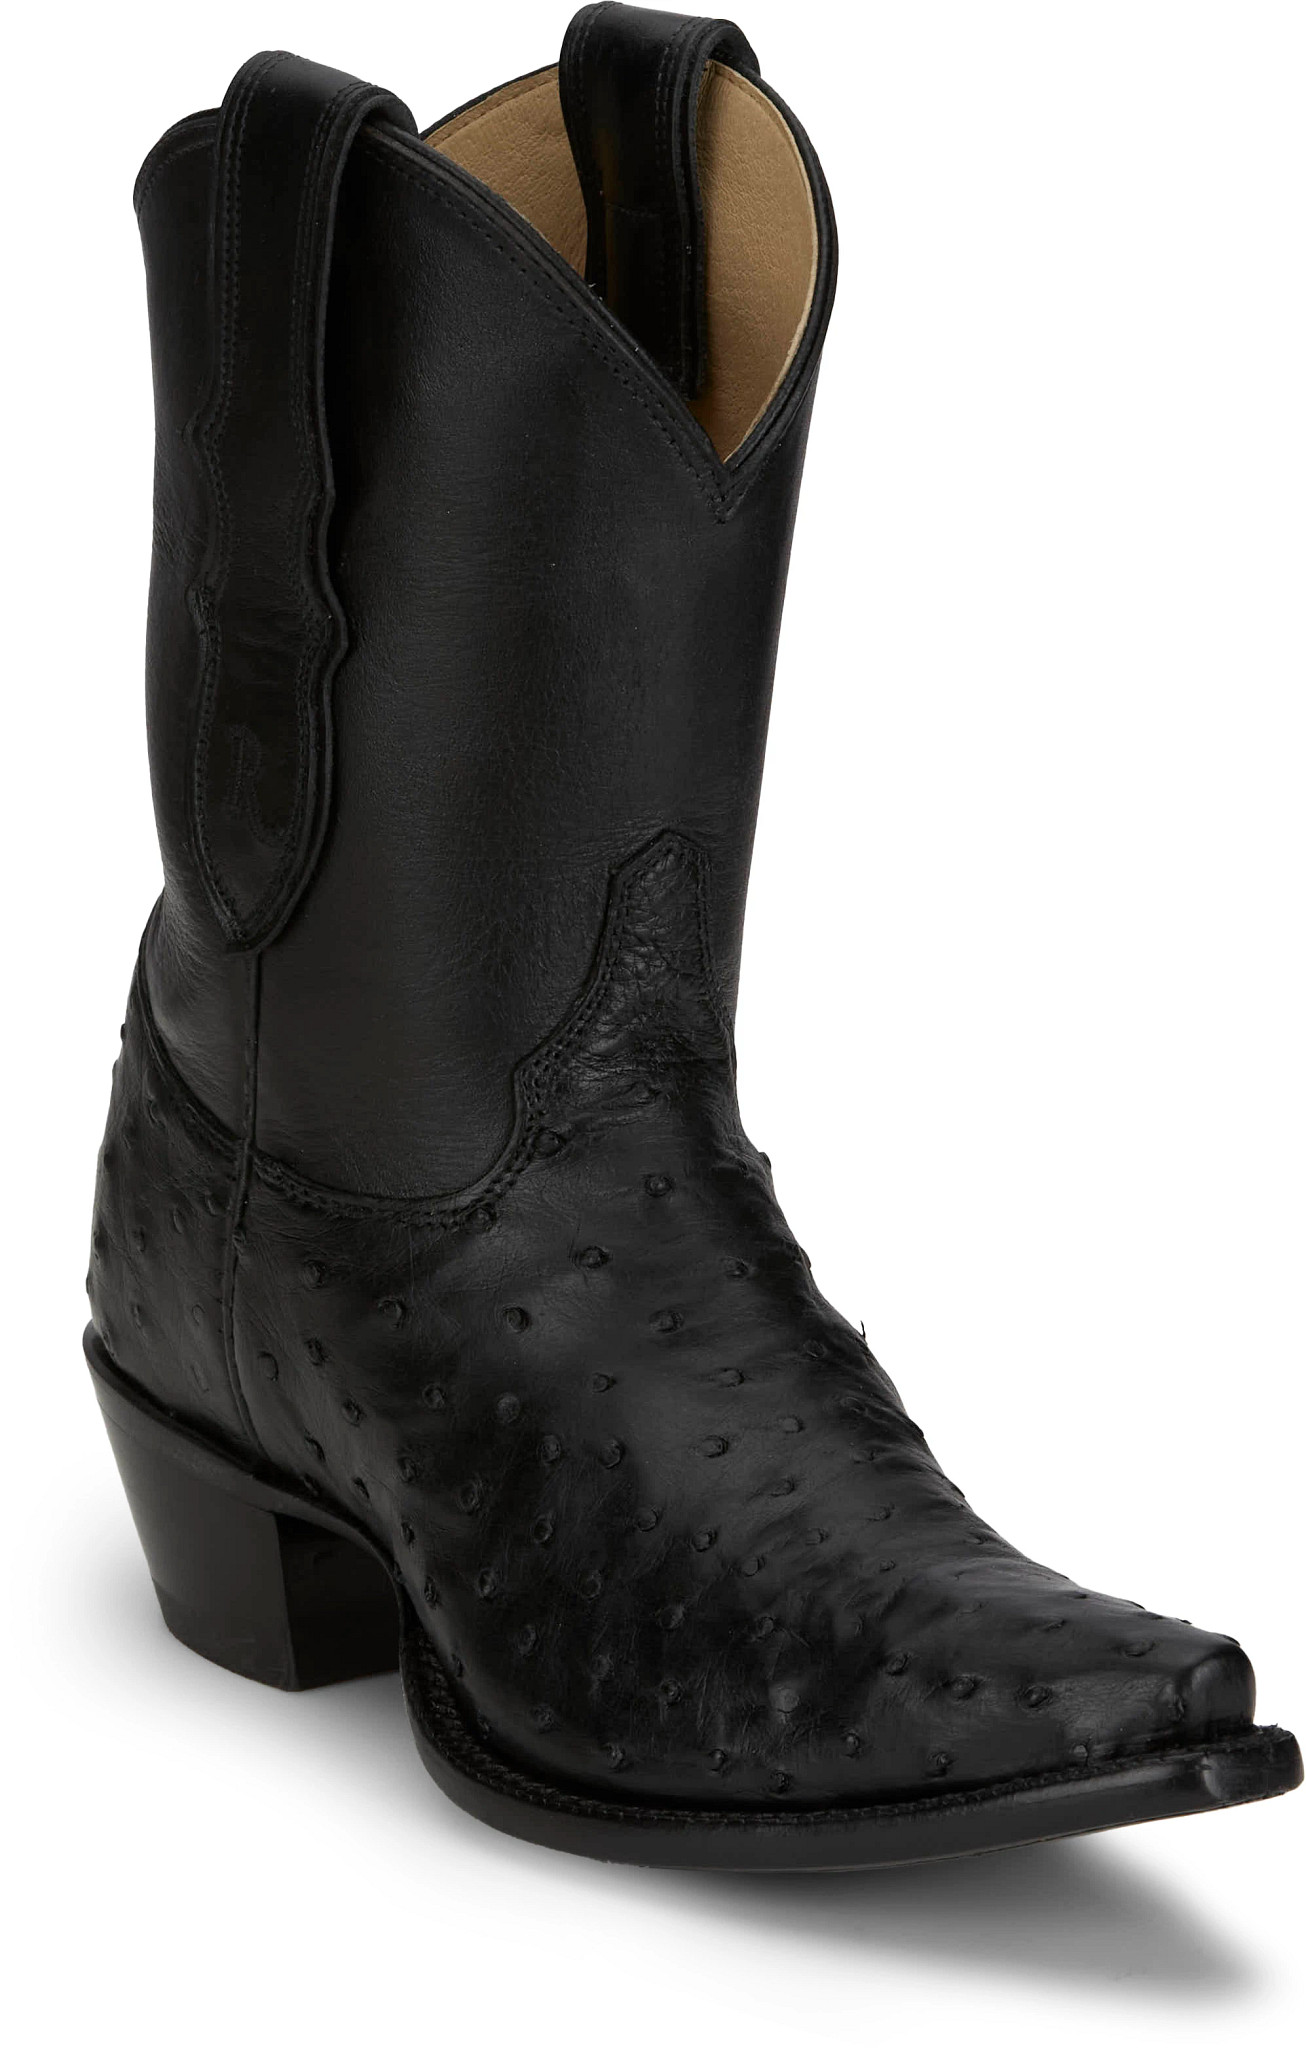 Buy Justin Women's Boots on Sale | Justin Boots